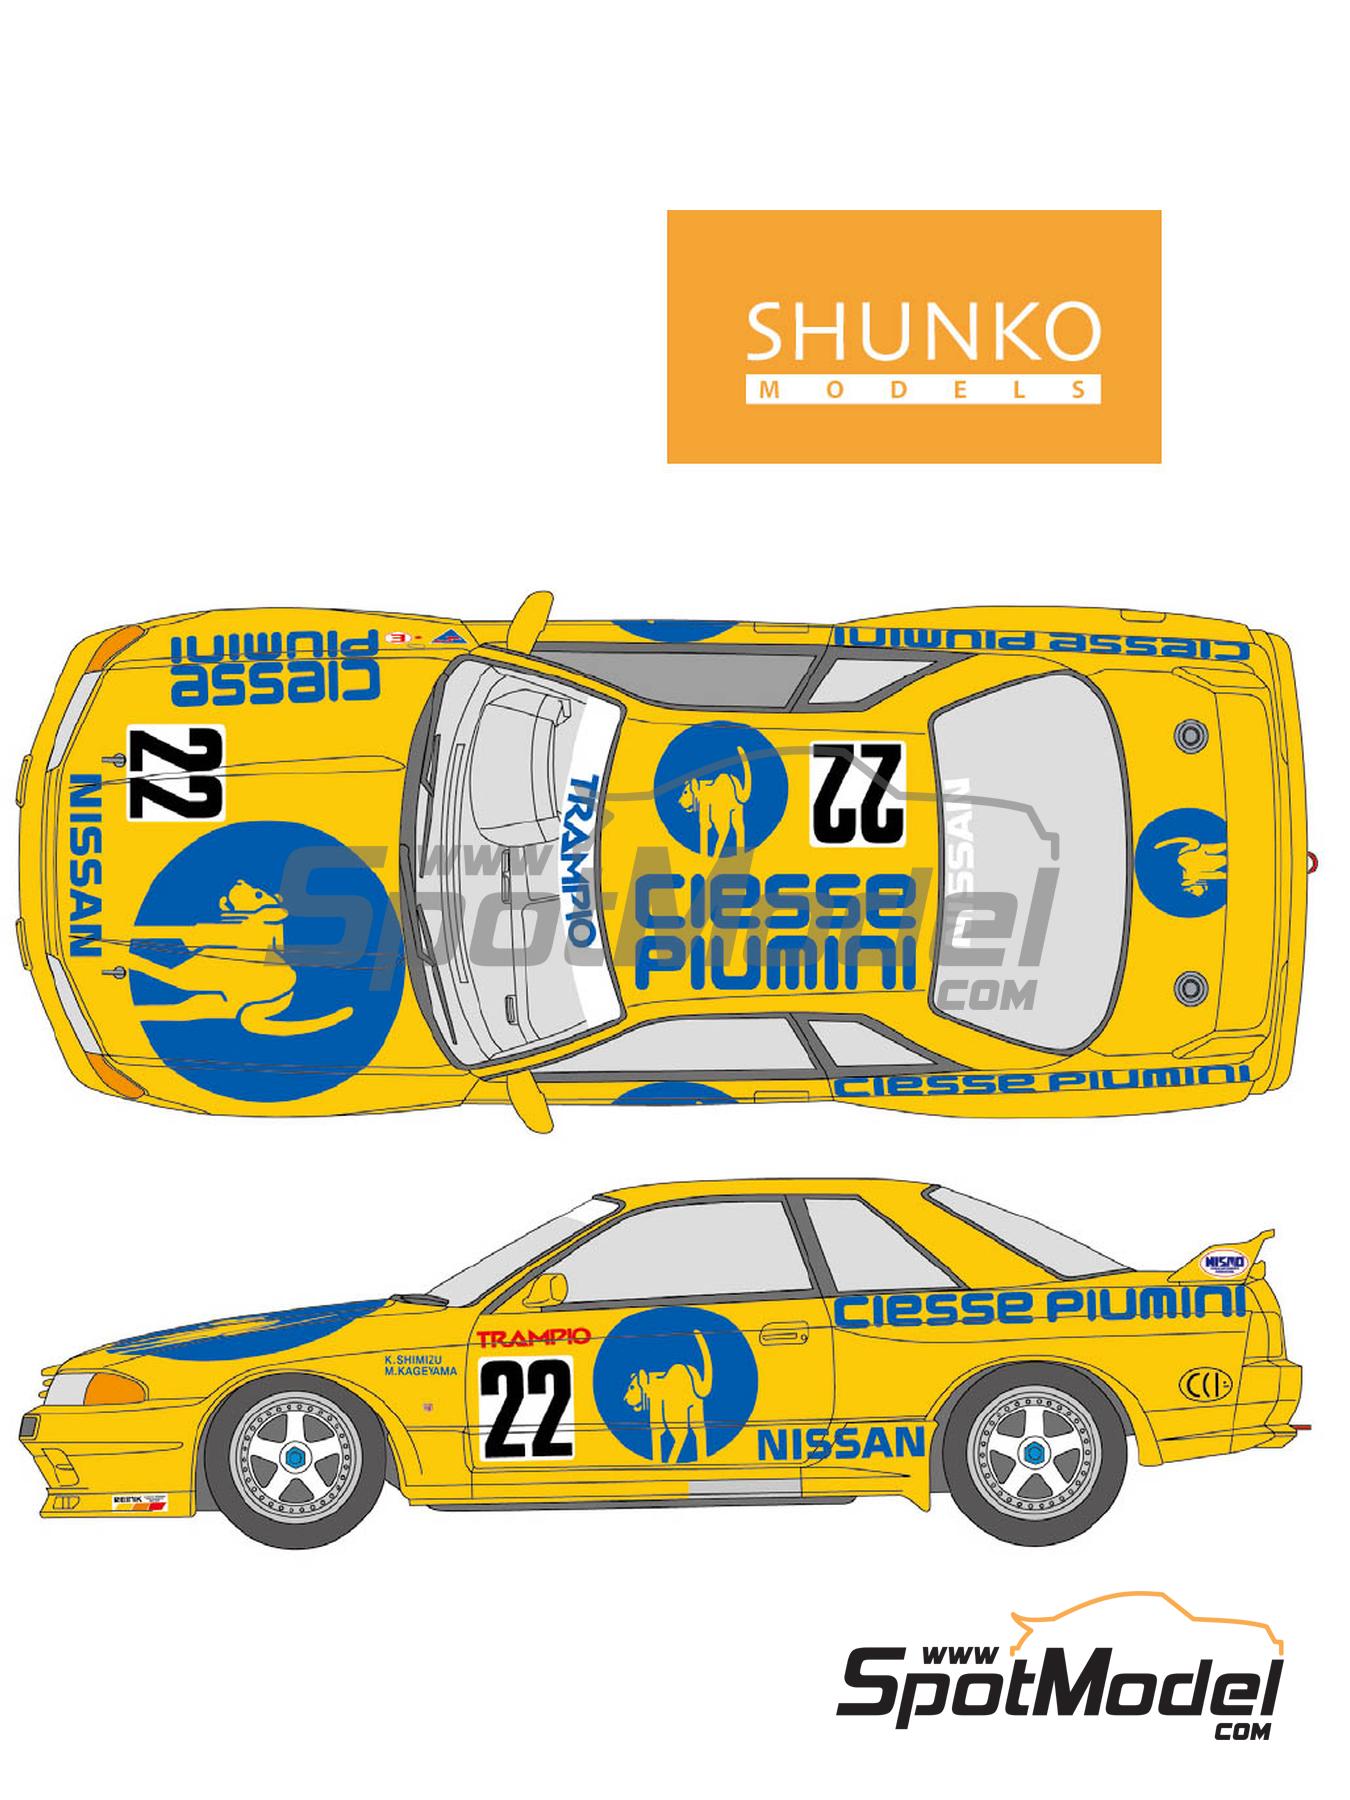 Shunko Models SHK-D484: Marking / livery 1/24 scale - Nissan 